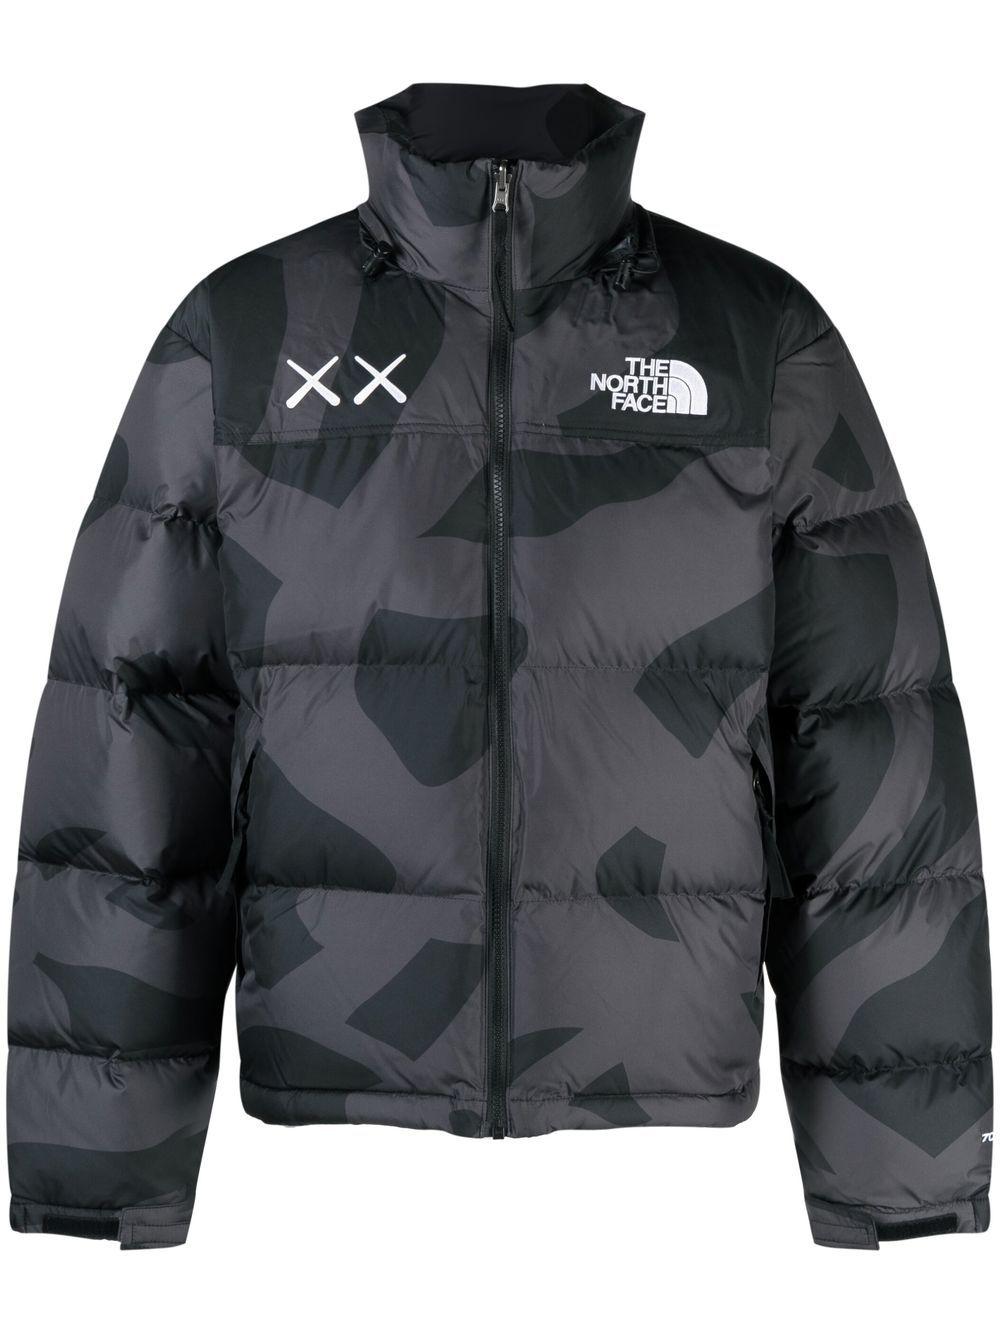 The North Face X Kaws 1996 Nuptse Jacket - Men's - Polyester/feather ...